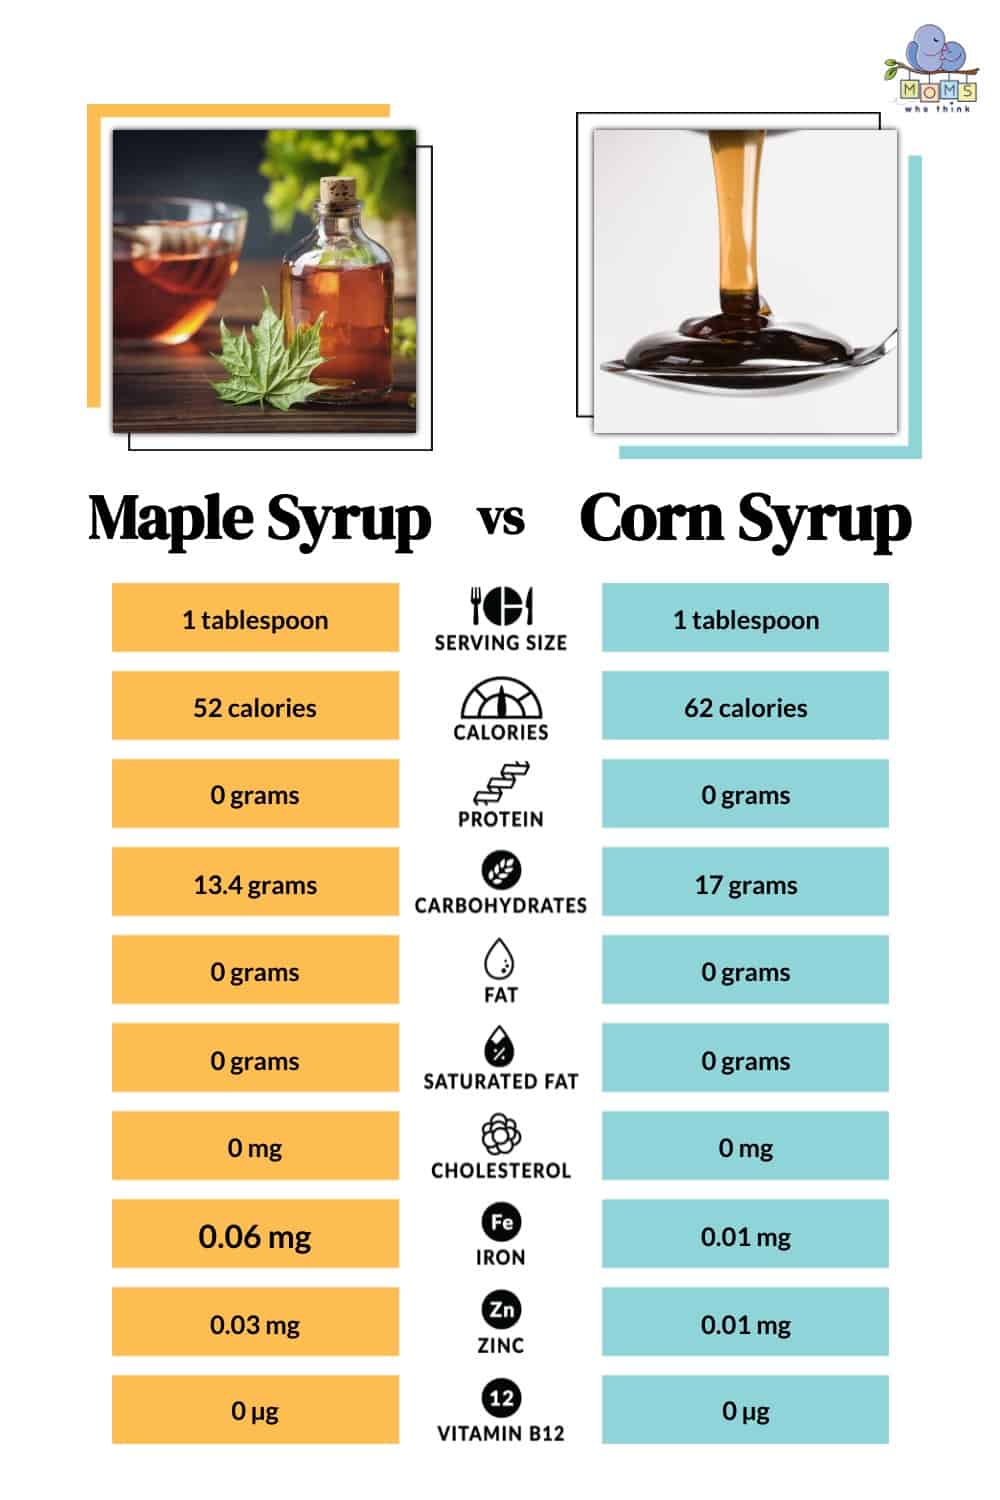 Maple Syrup vs Corn Syrup Nutritional Facts